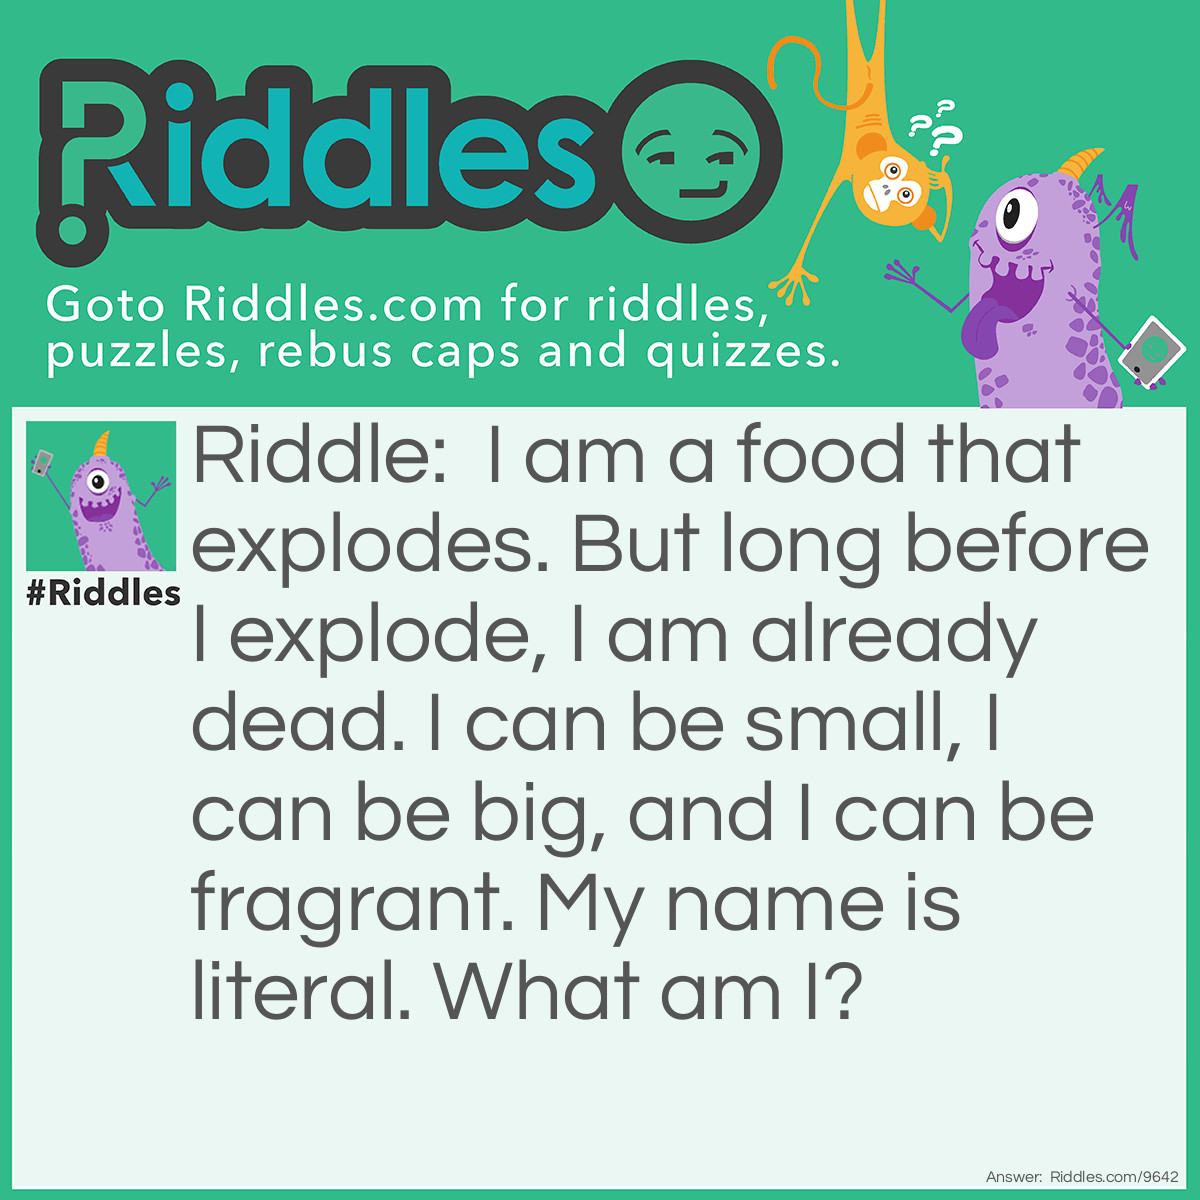 Riddle: I am a food that explodes. But long before I explode, I am already dead. I can be small, I can be big, and I can be fragrant. My name is literal. What am I? Answer: Popcorn!